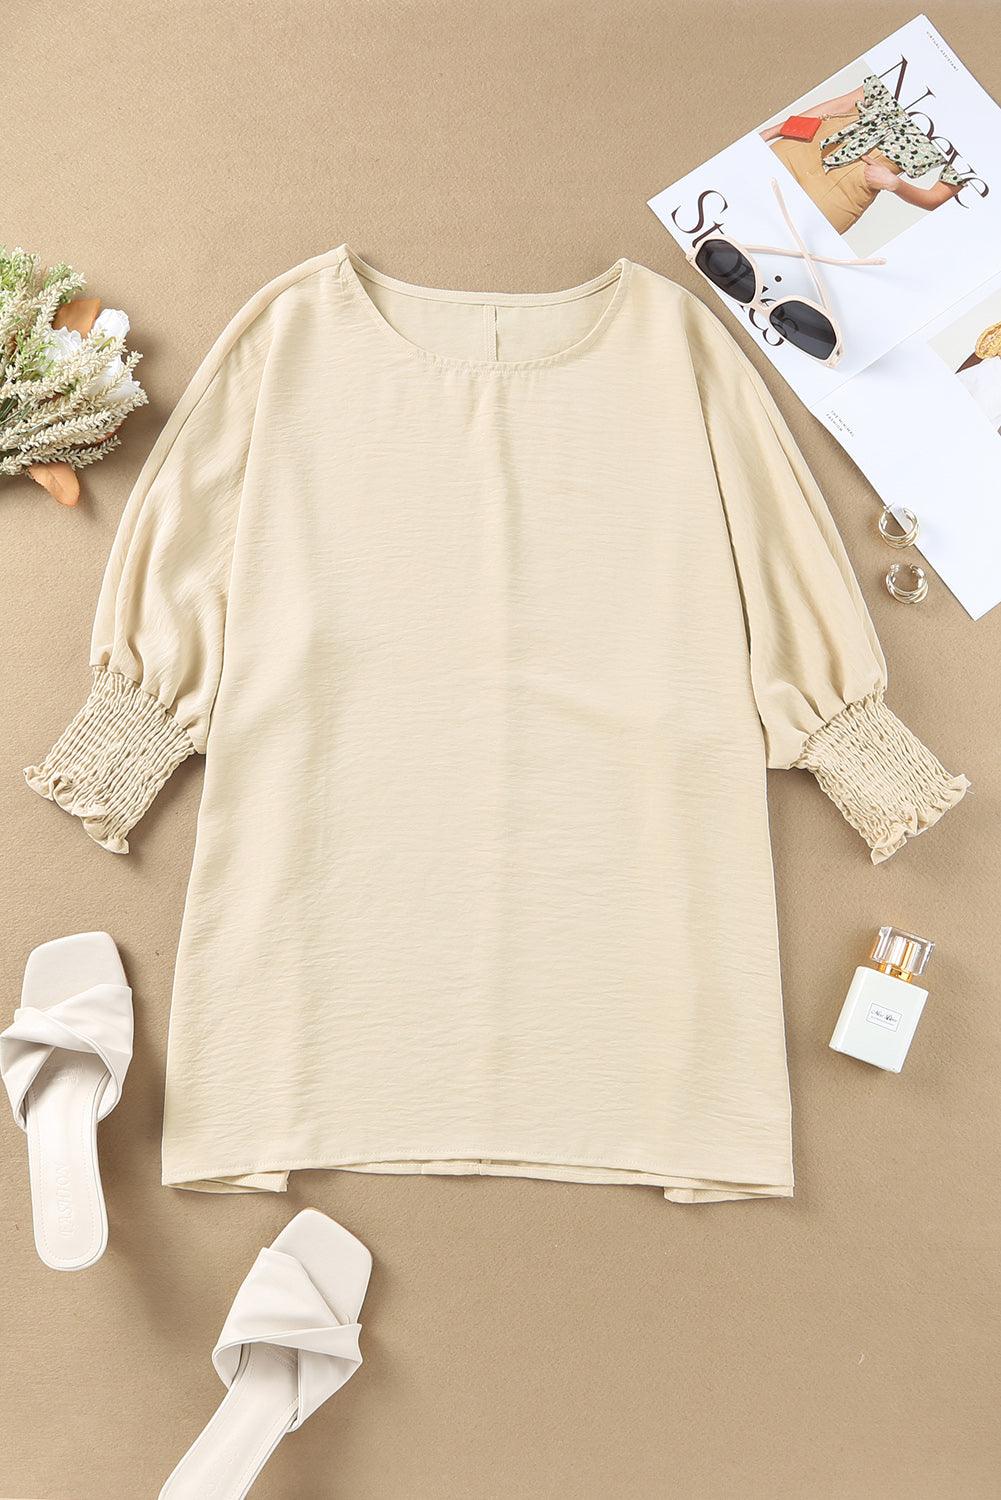 Smocked Wrist Shift Top Blouse for Women - Apricot